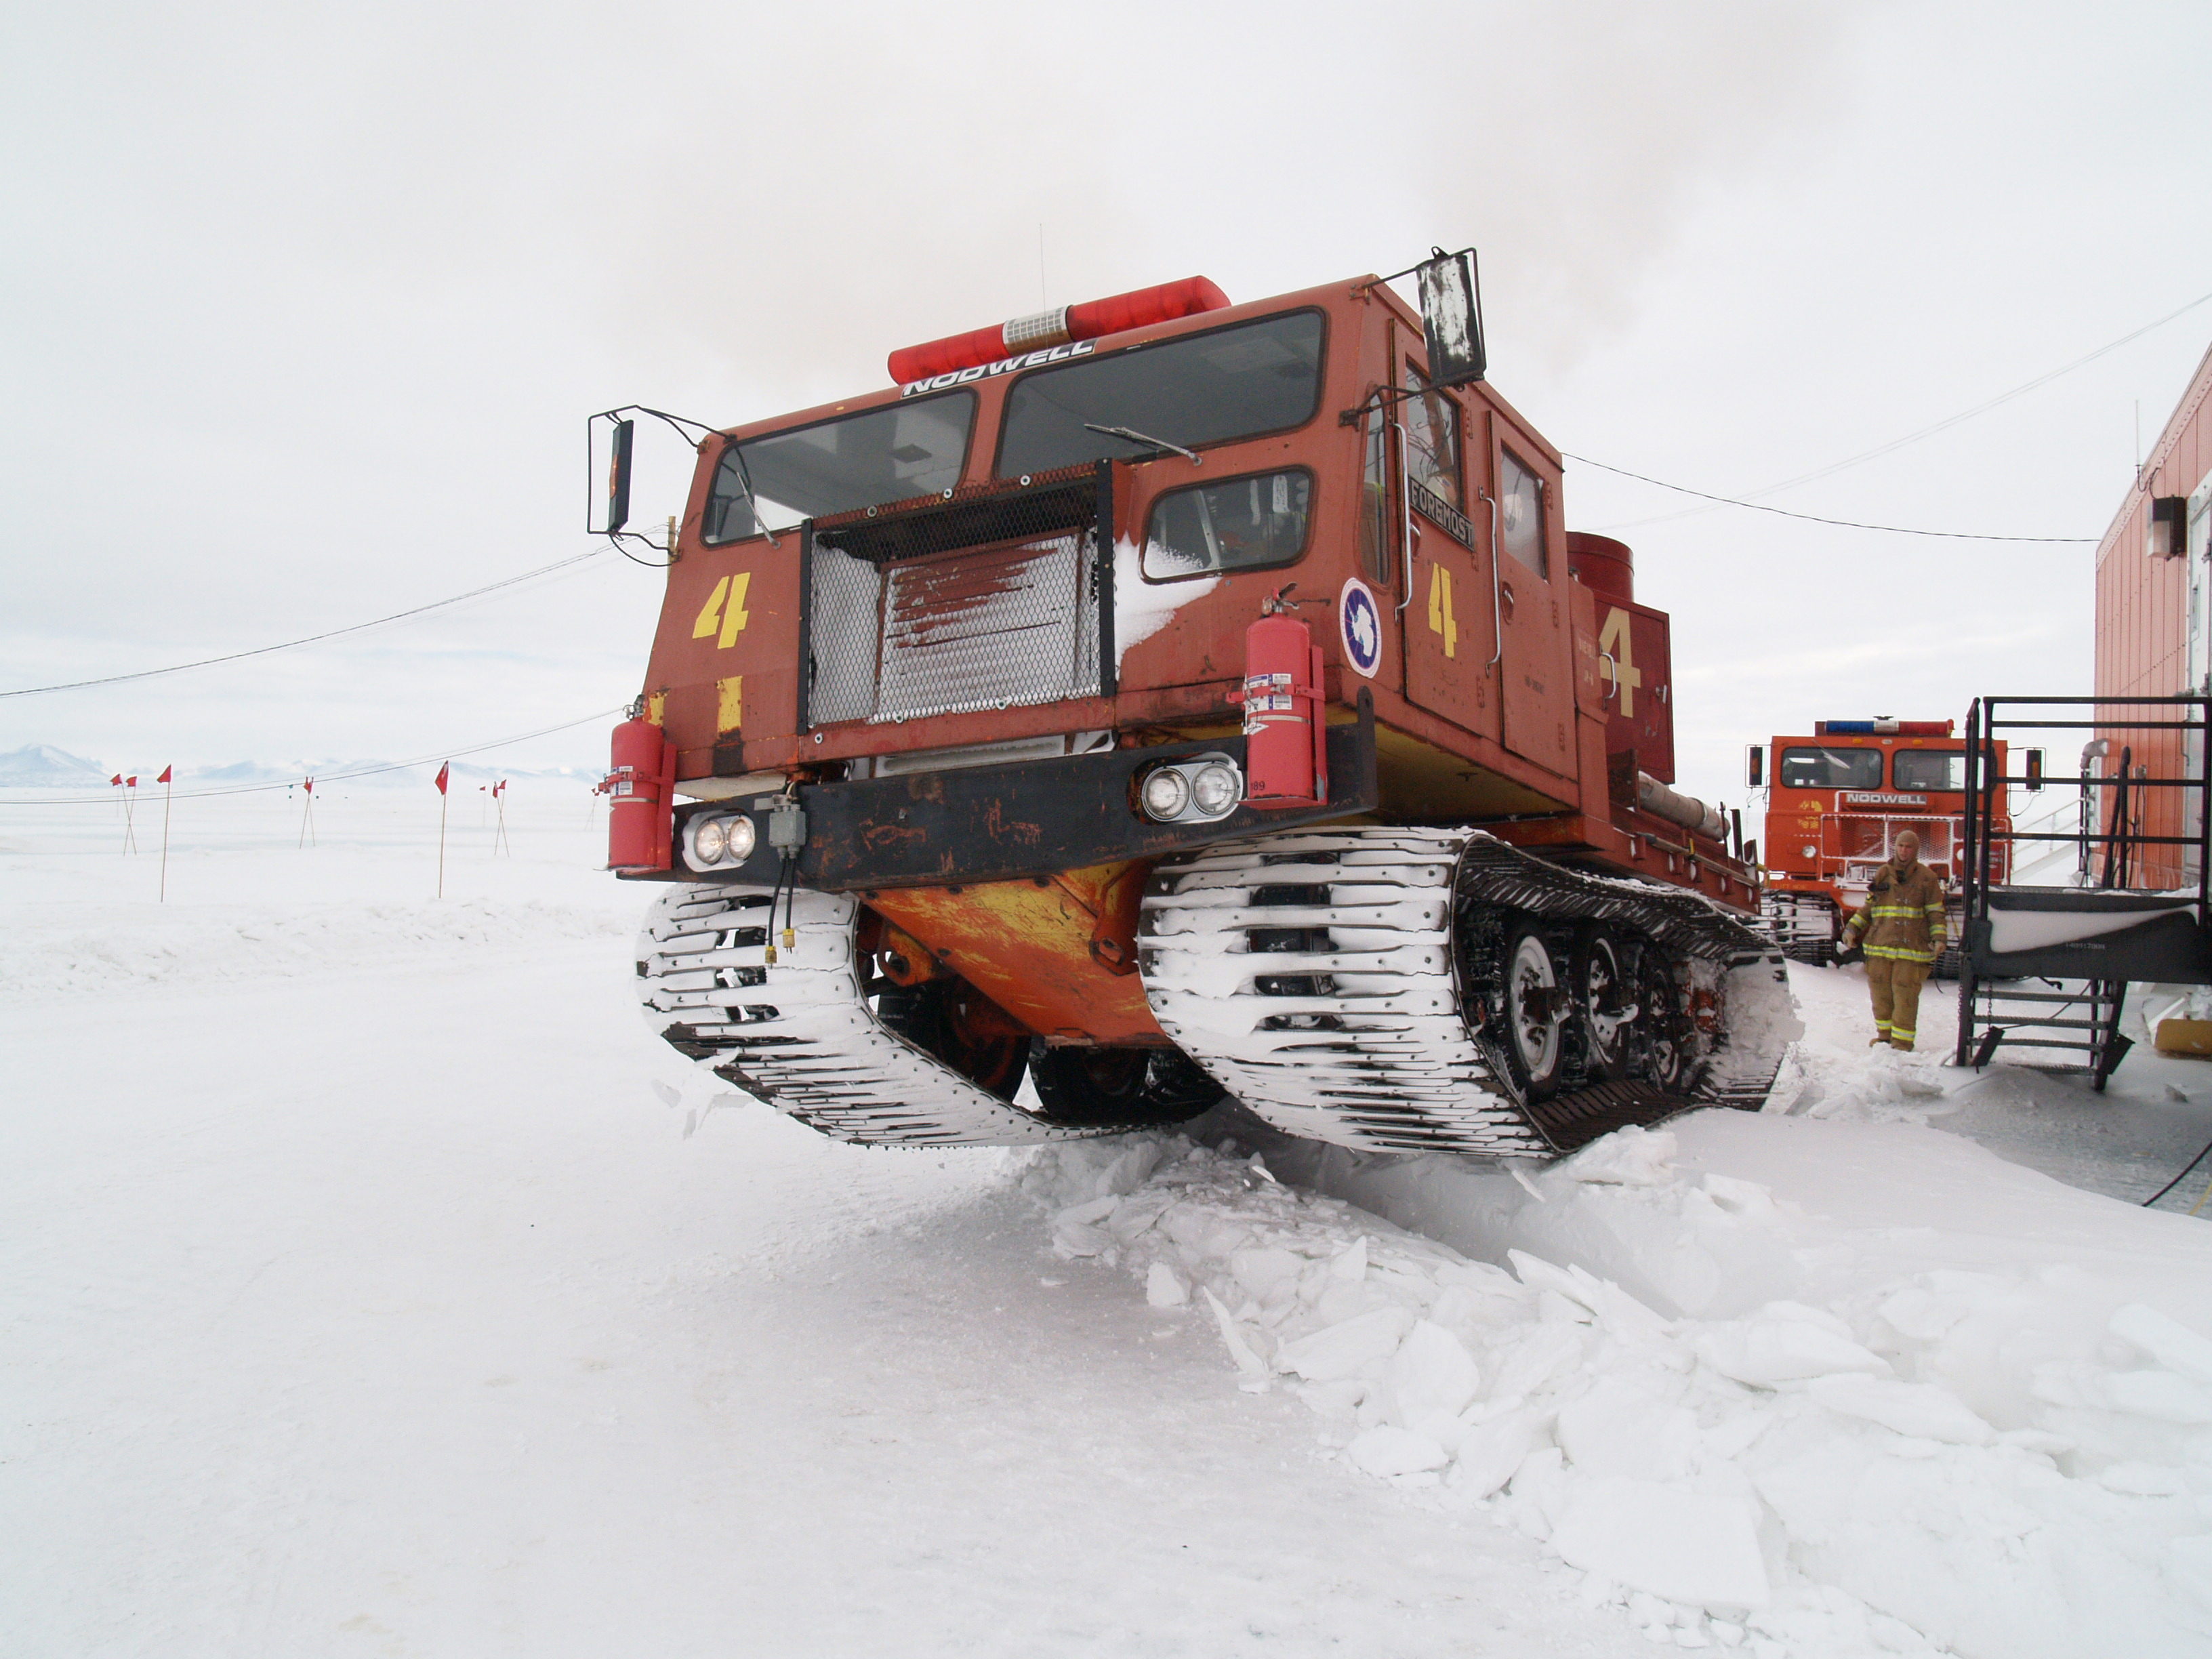 A fire engine tractor on snow.